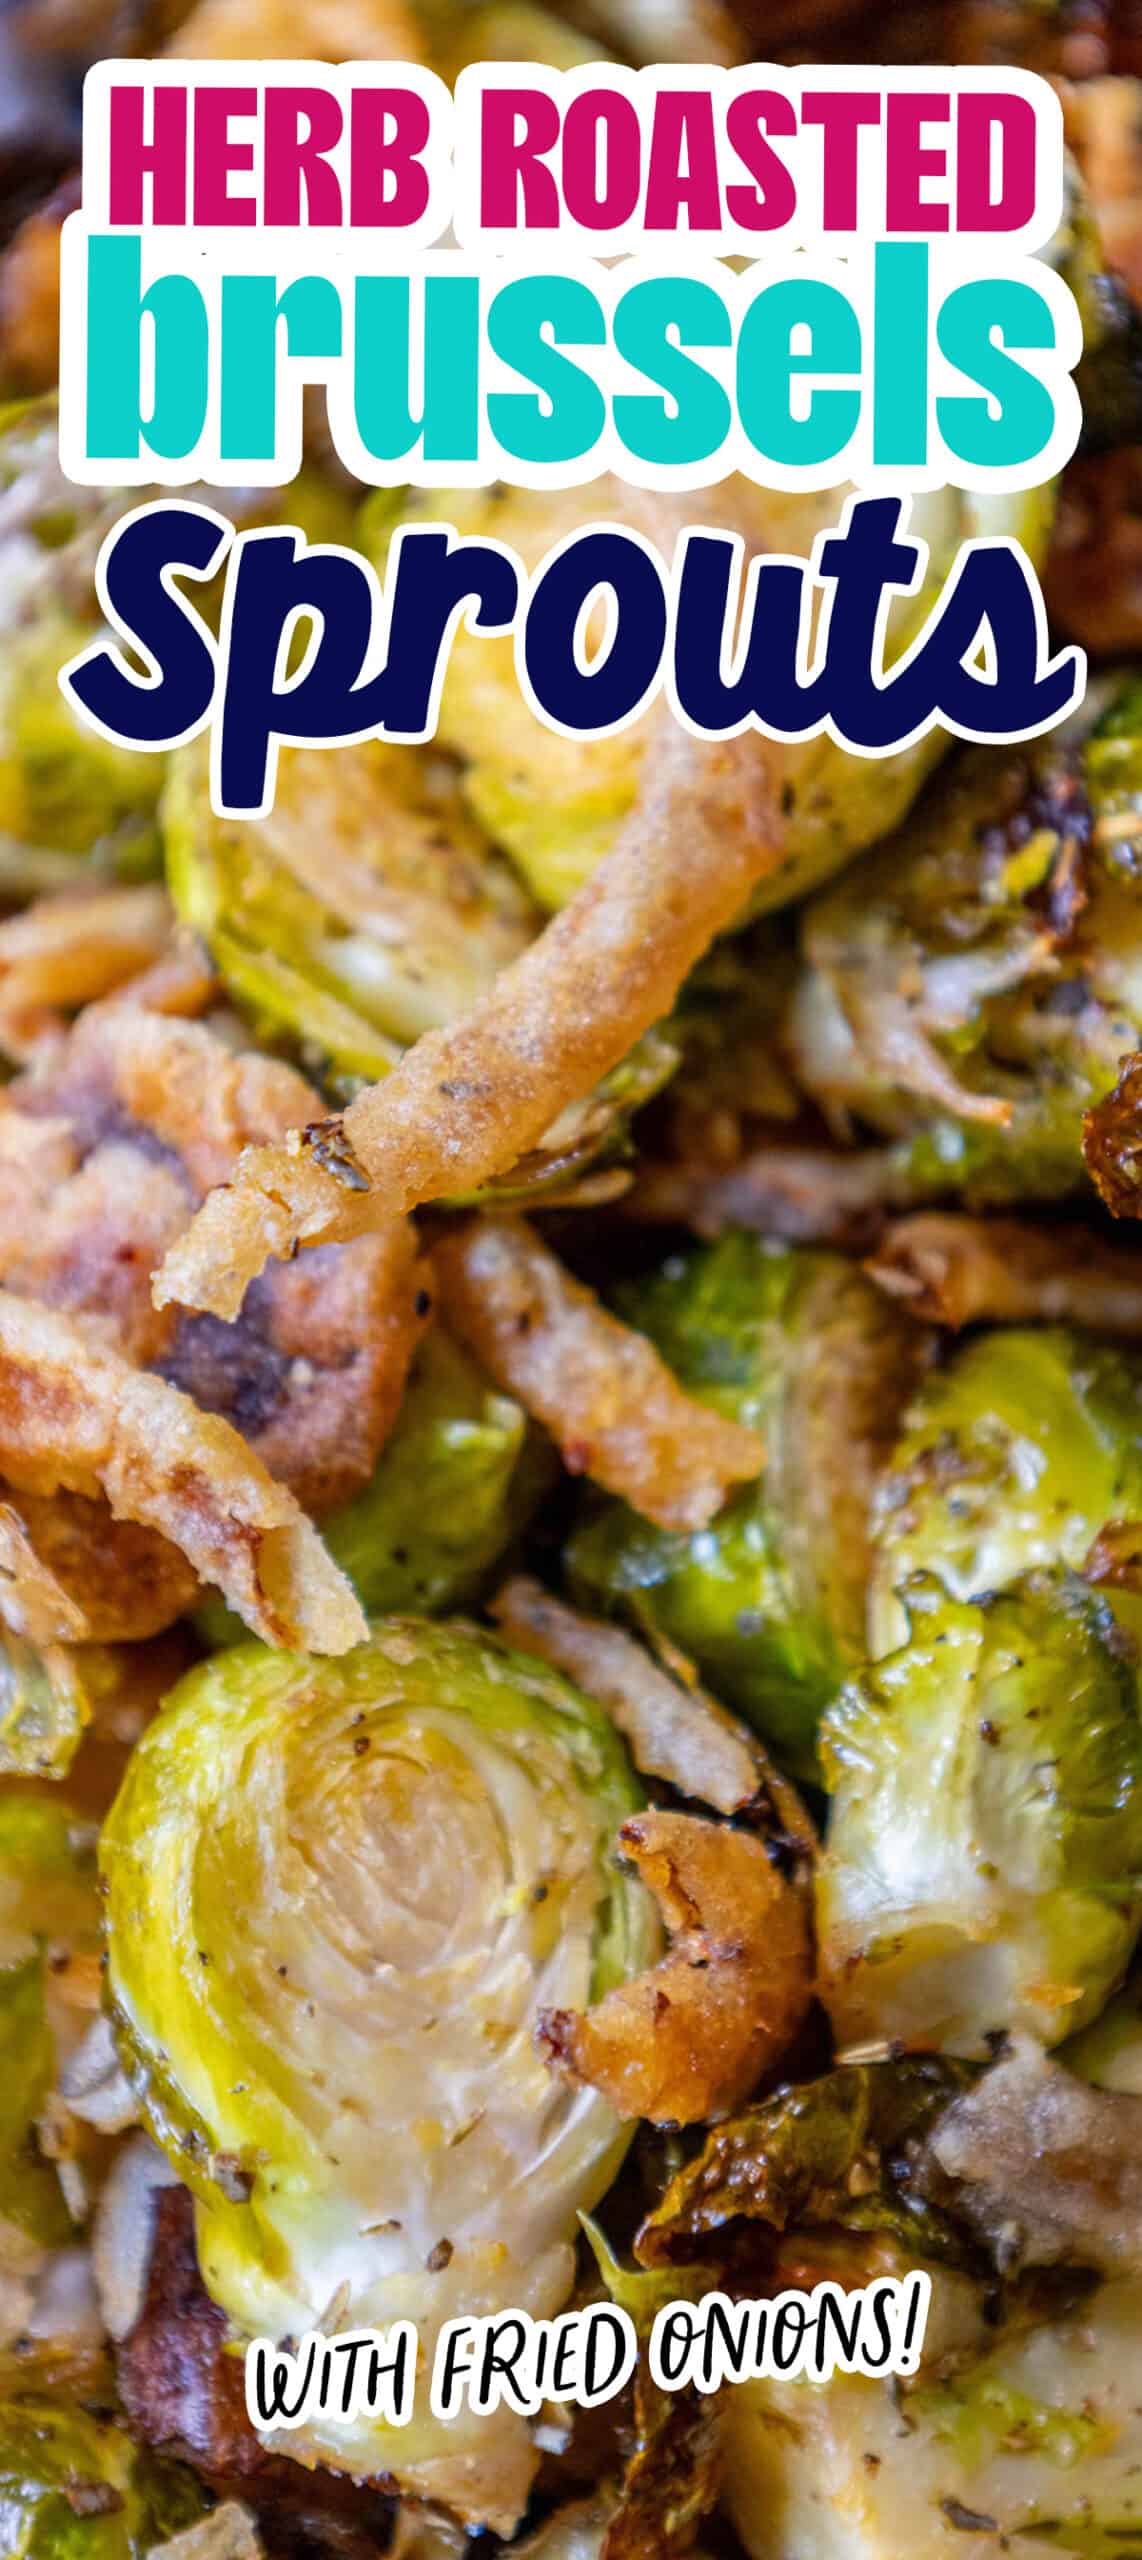 Roasted brussels sprouts with fried onions.